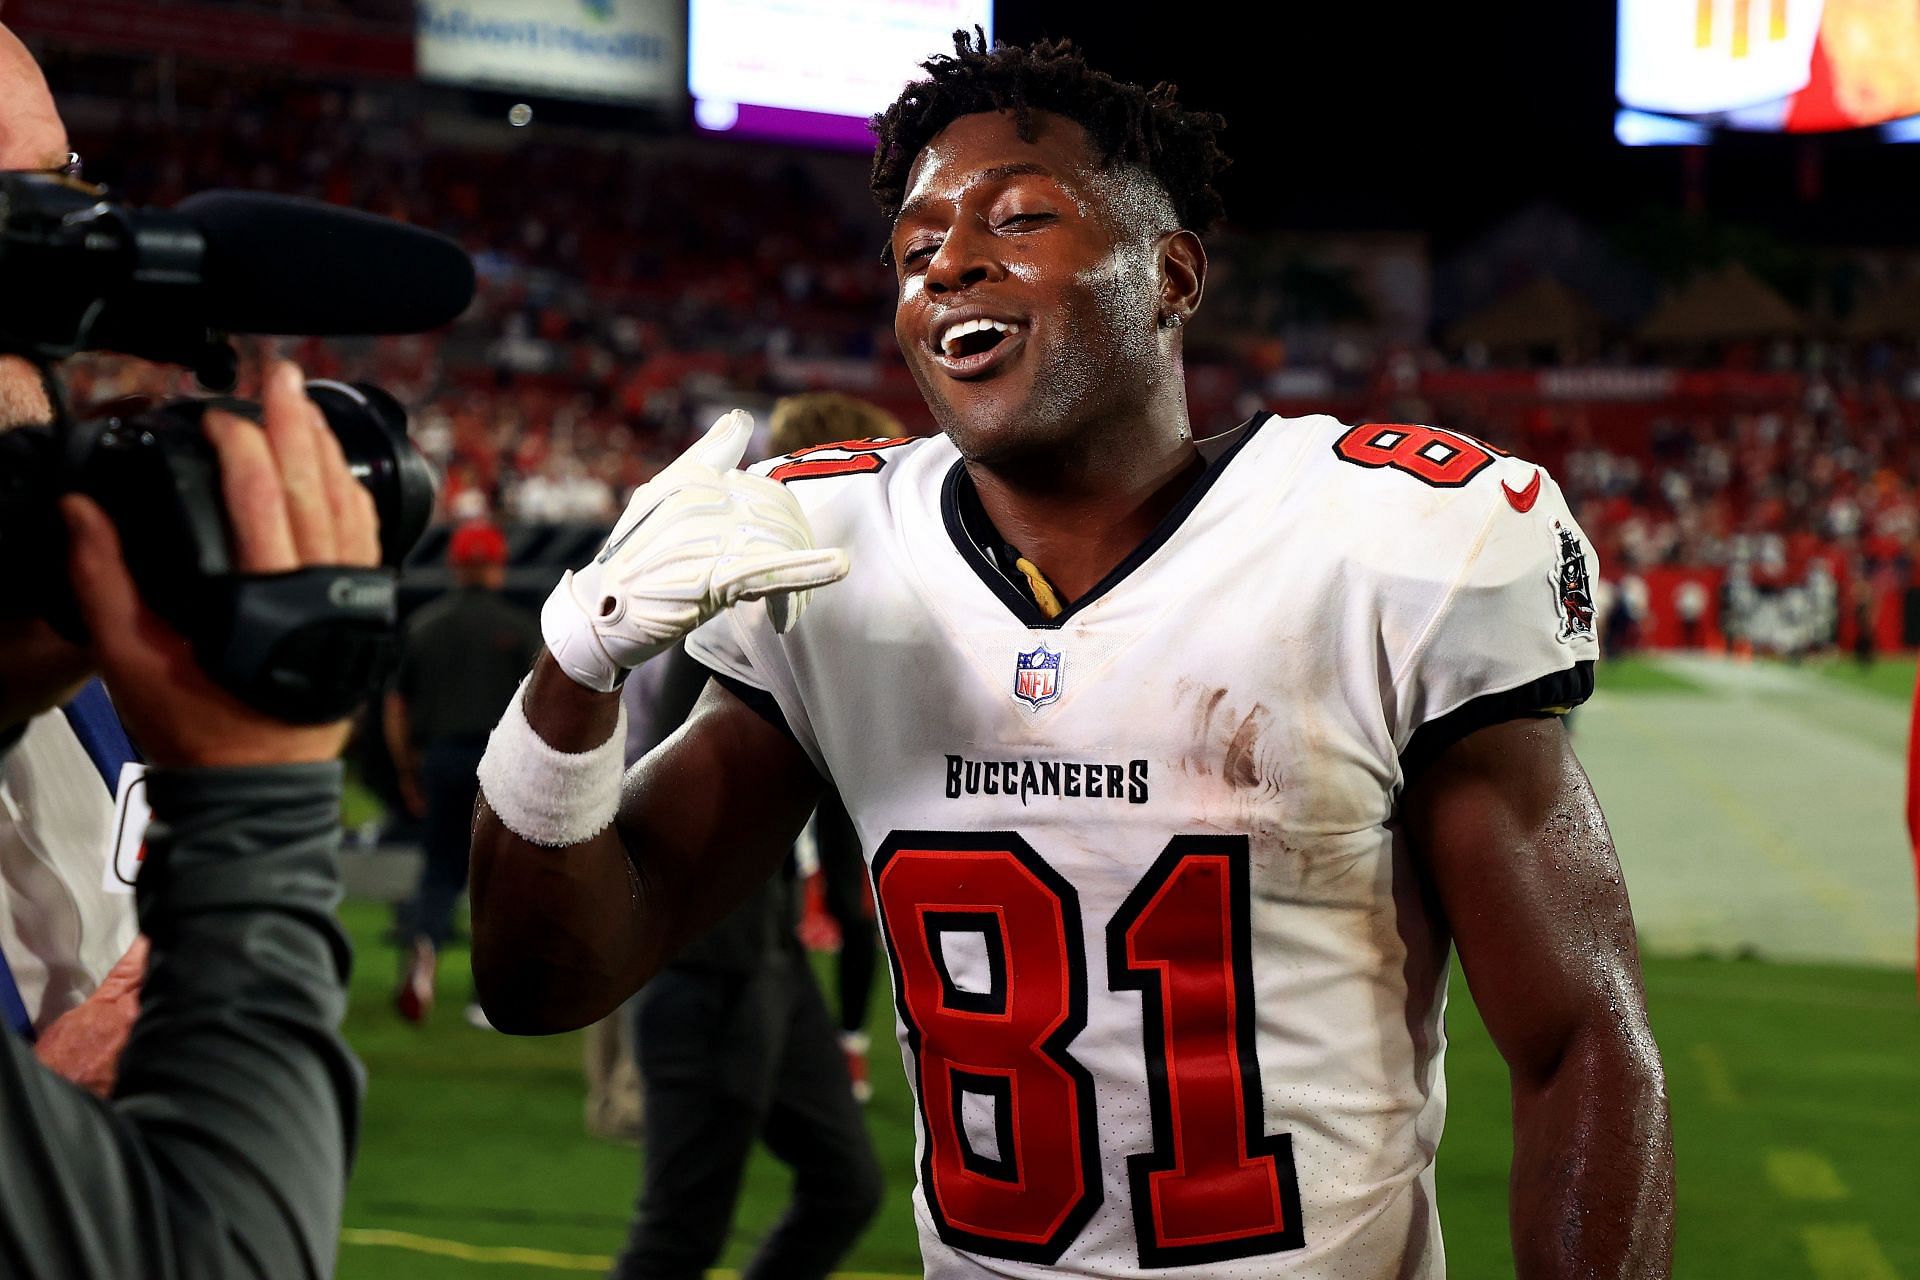 The former Buccaneers receiver is now a free agent